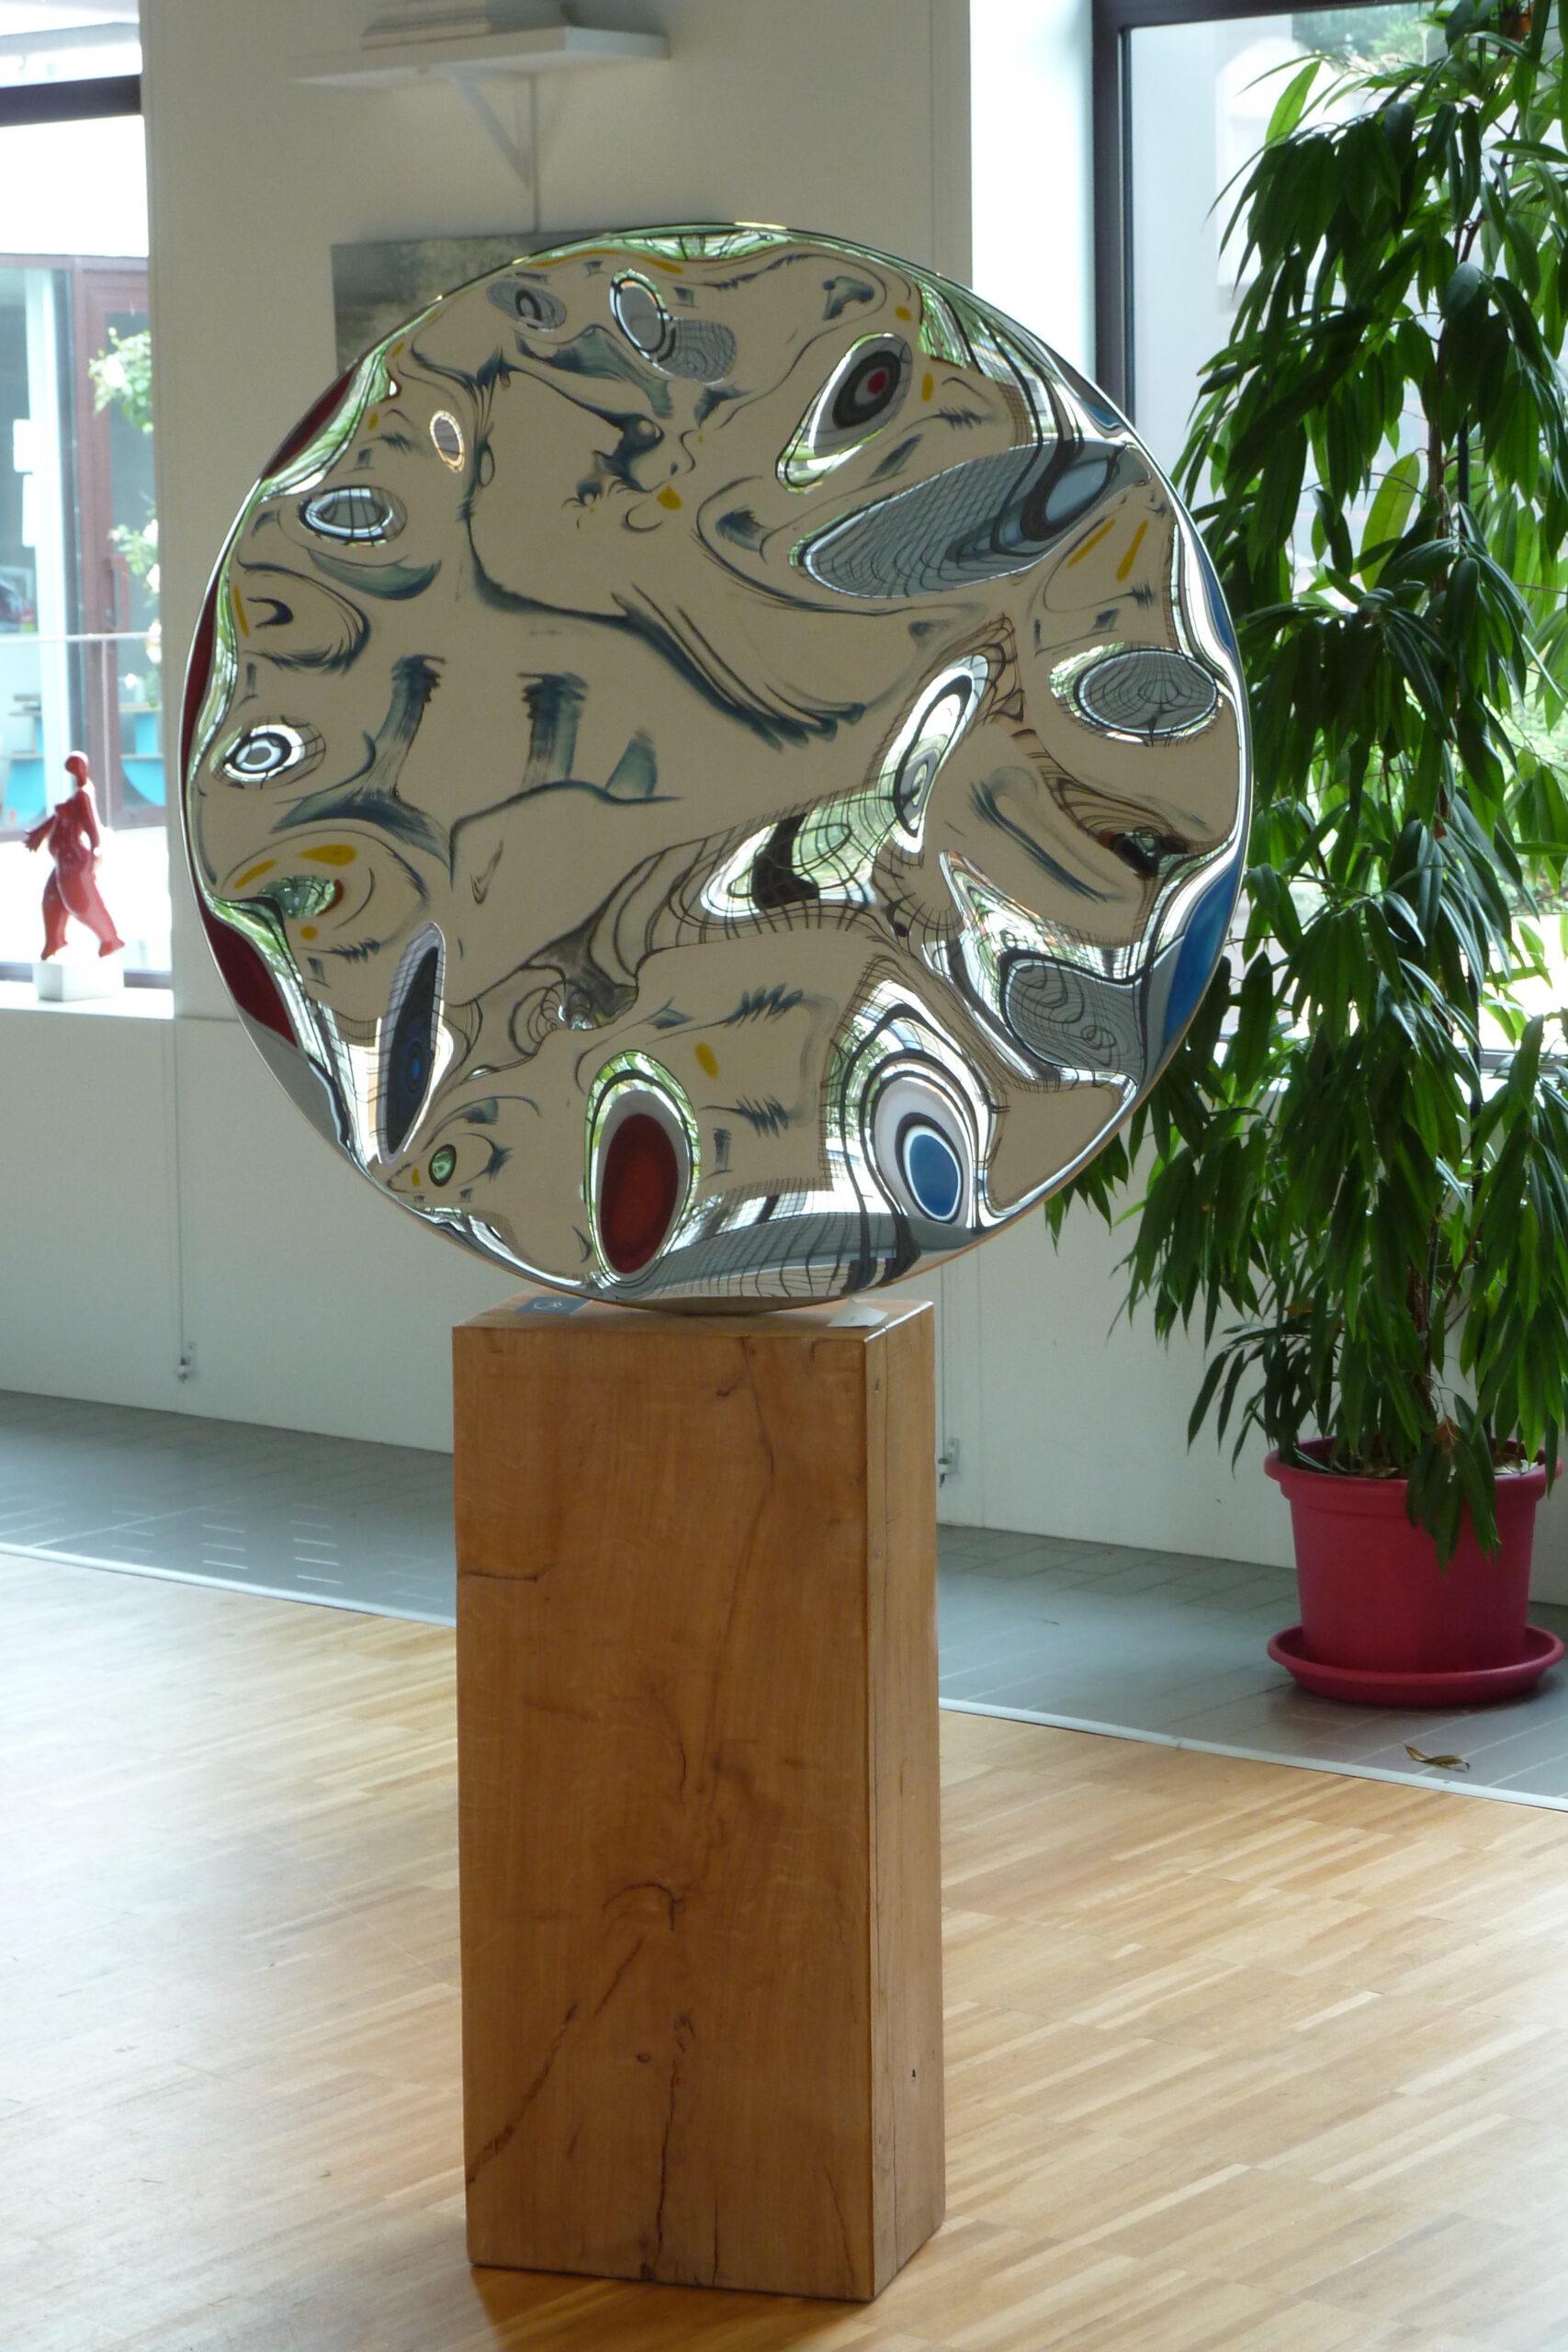 “Shattered” mirror II by Franck K - Stainless steel sculpture, reflection, light For Sale 1